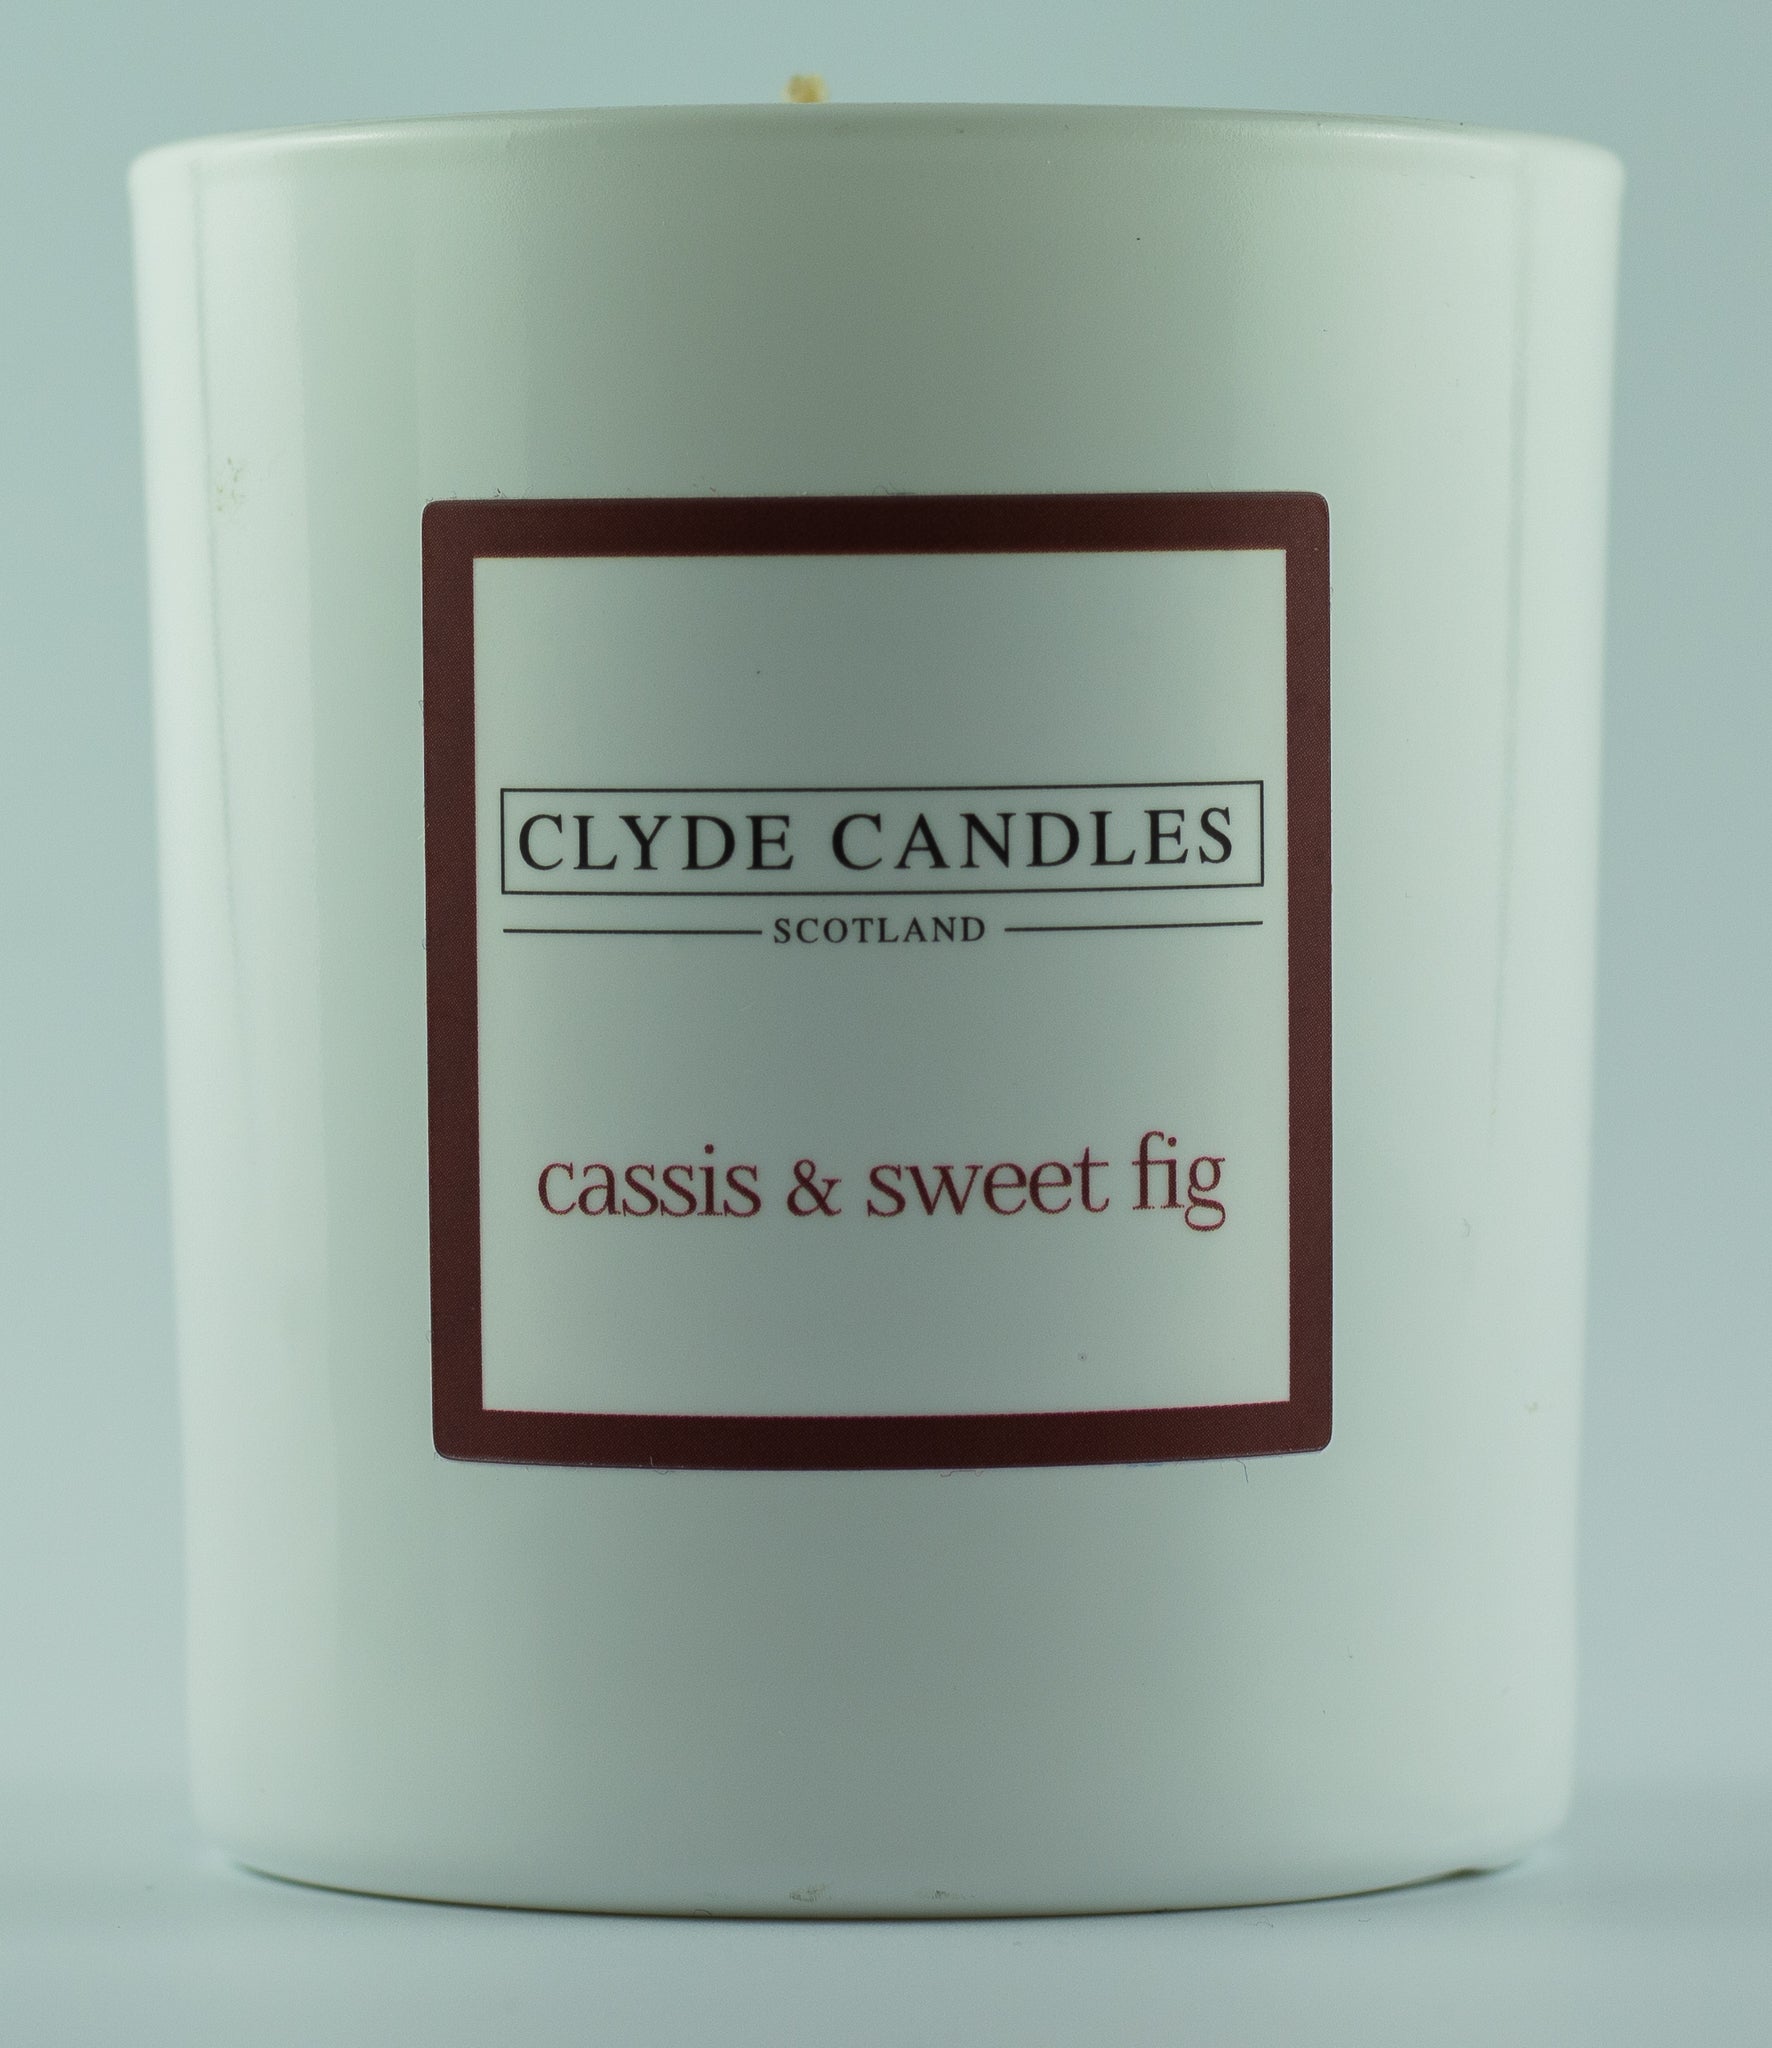 Cassis & Sweet Fig Gift Box Candle - Large Glass Natural Soy wax, Scottish Candles, Clyde Candles, luxury gifts uk